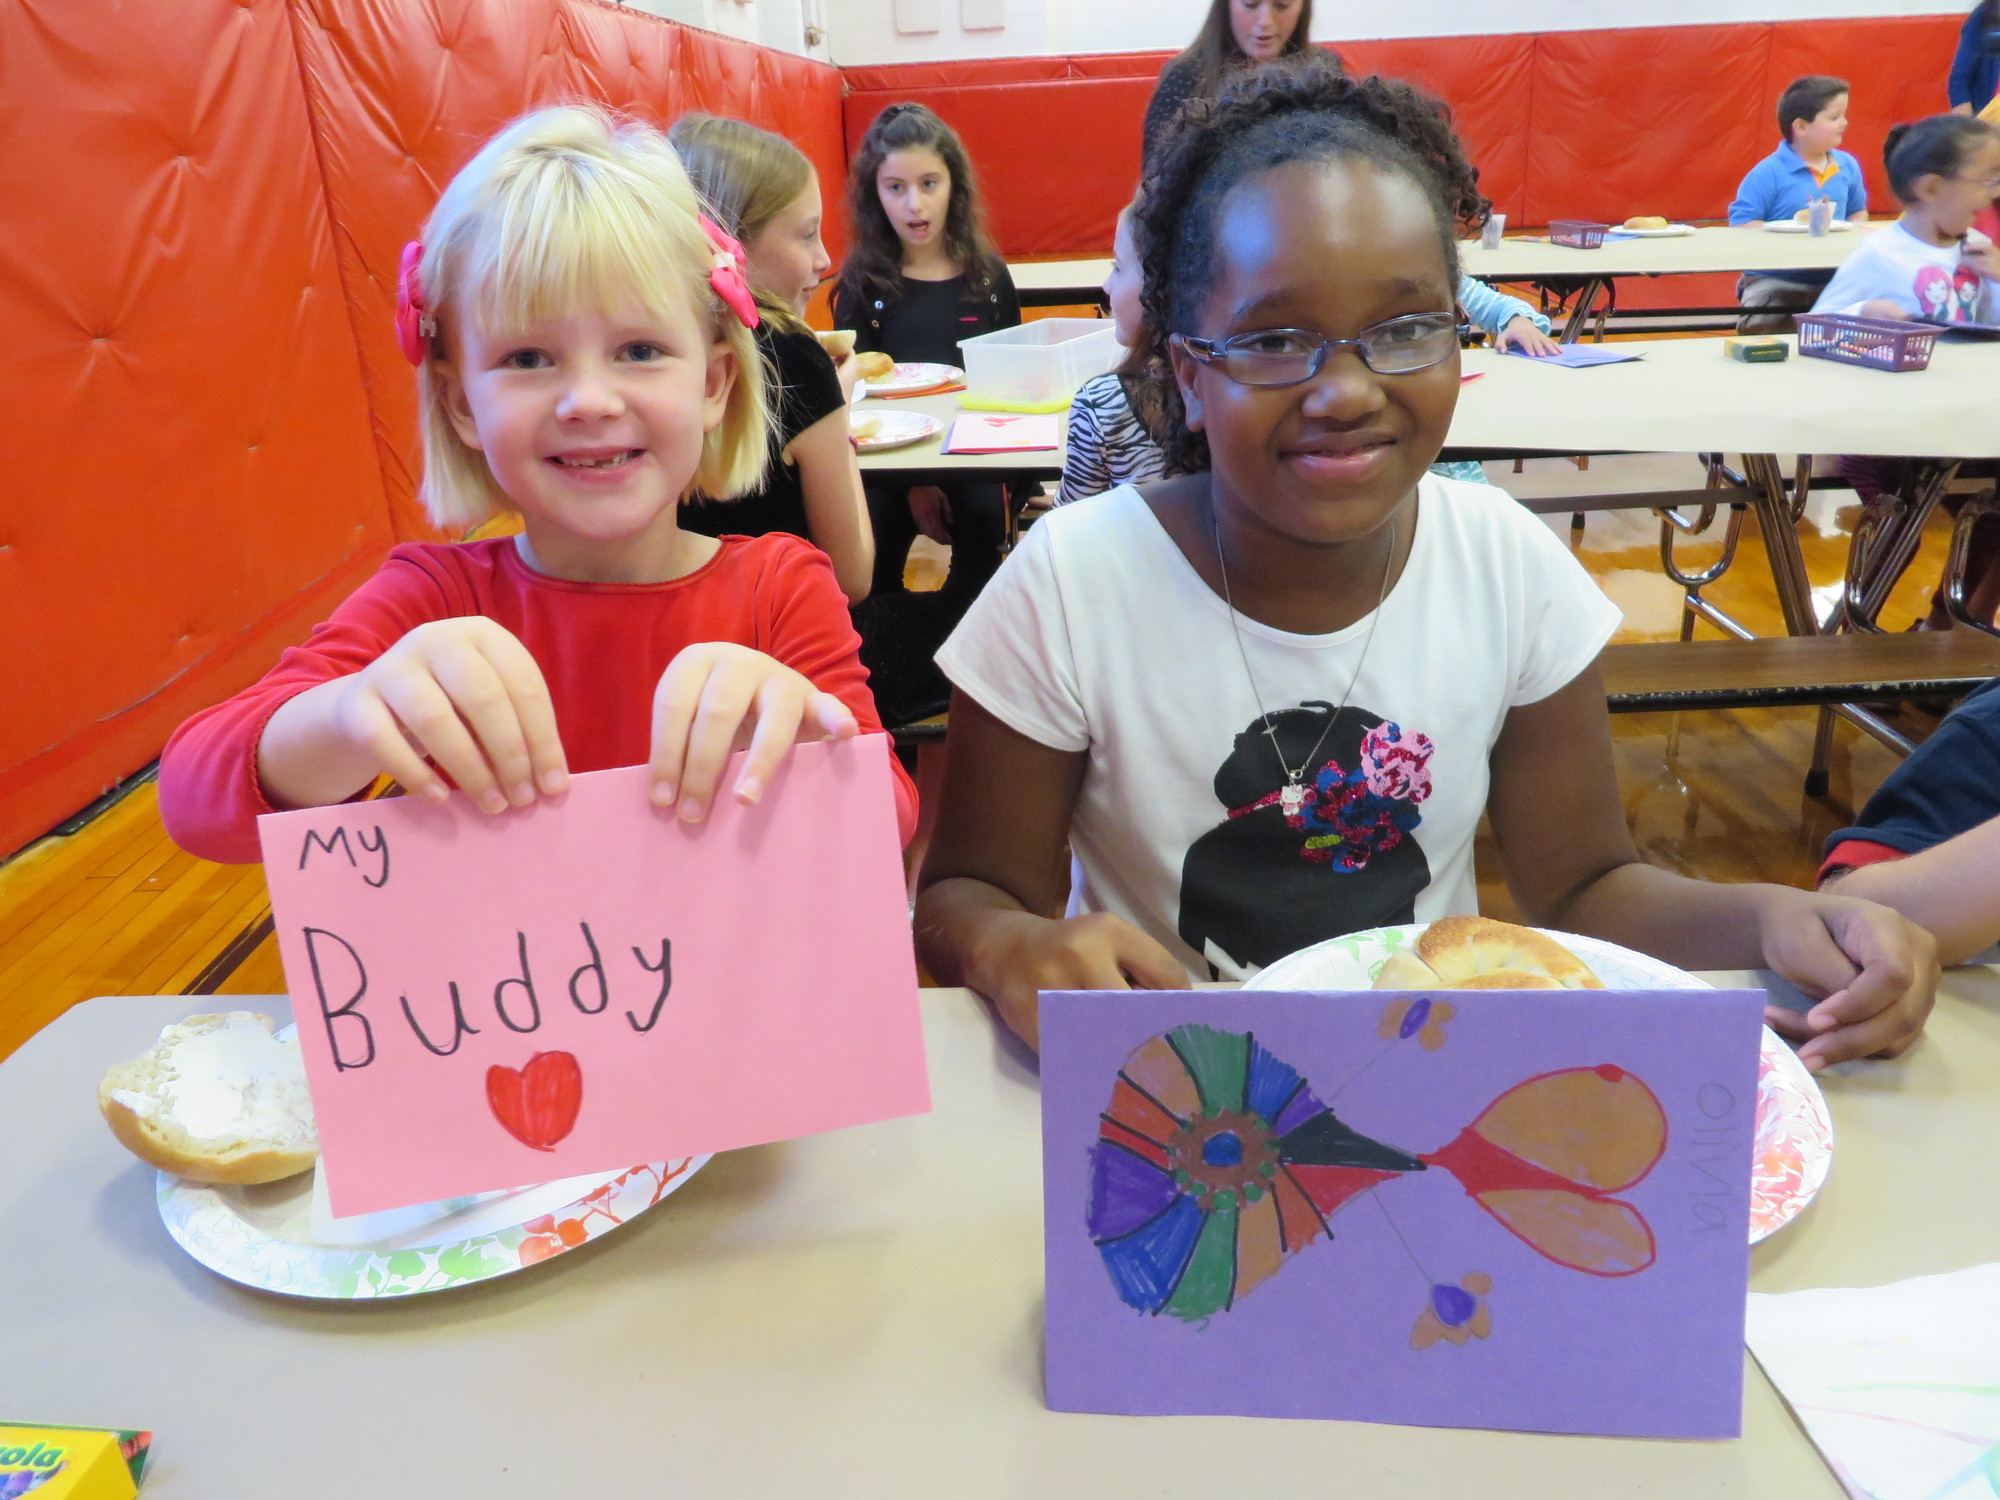 Olivia Mulhal and Sarai Hodge showed off the cards they made for each other.